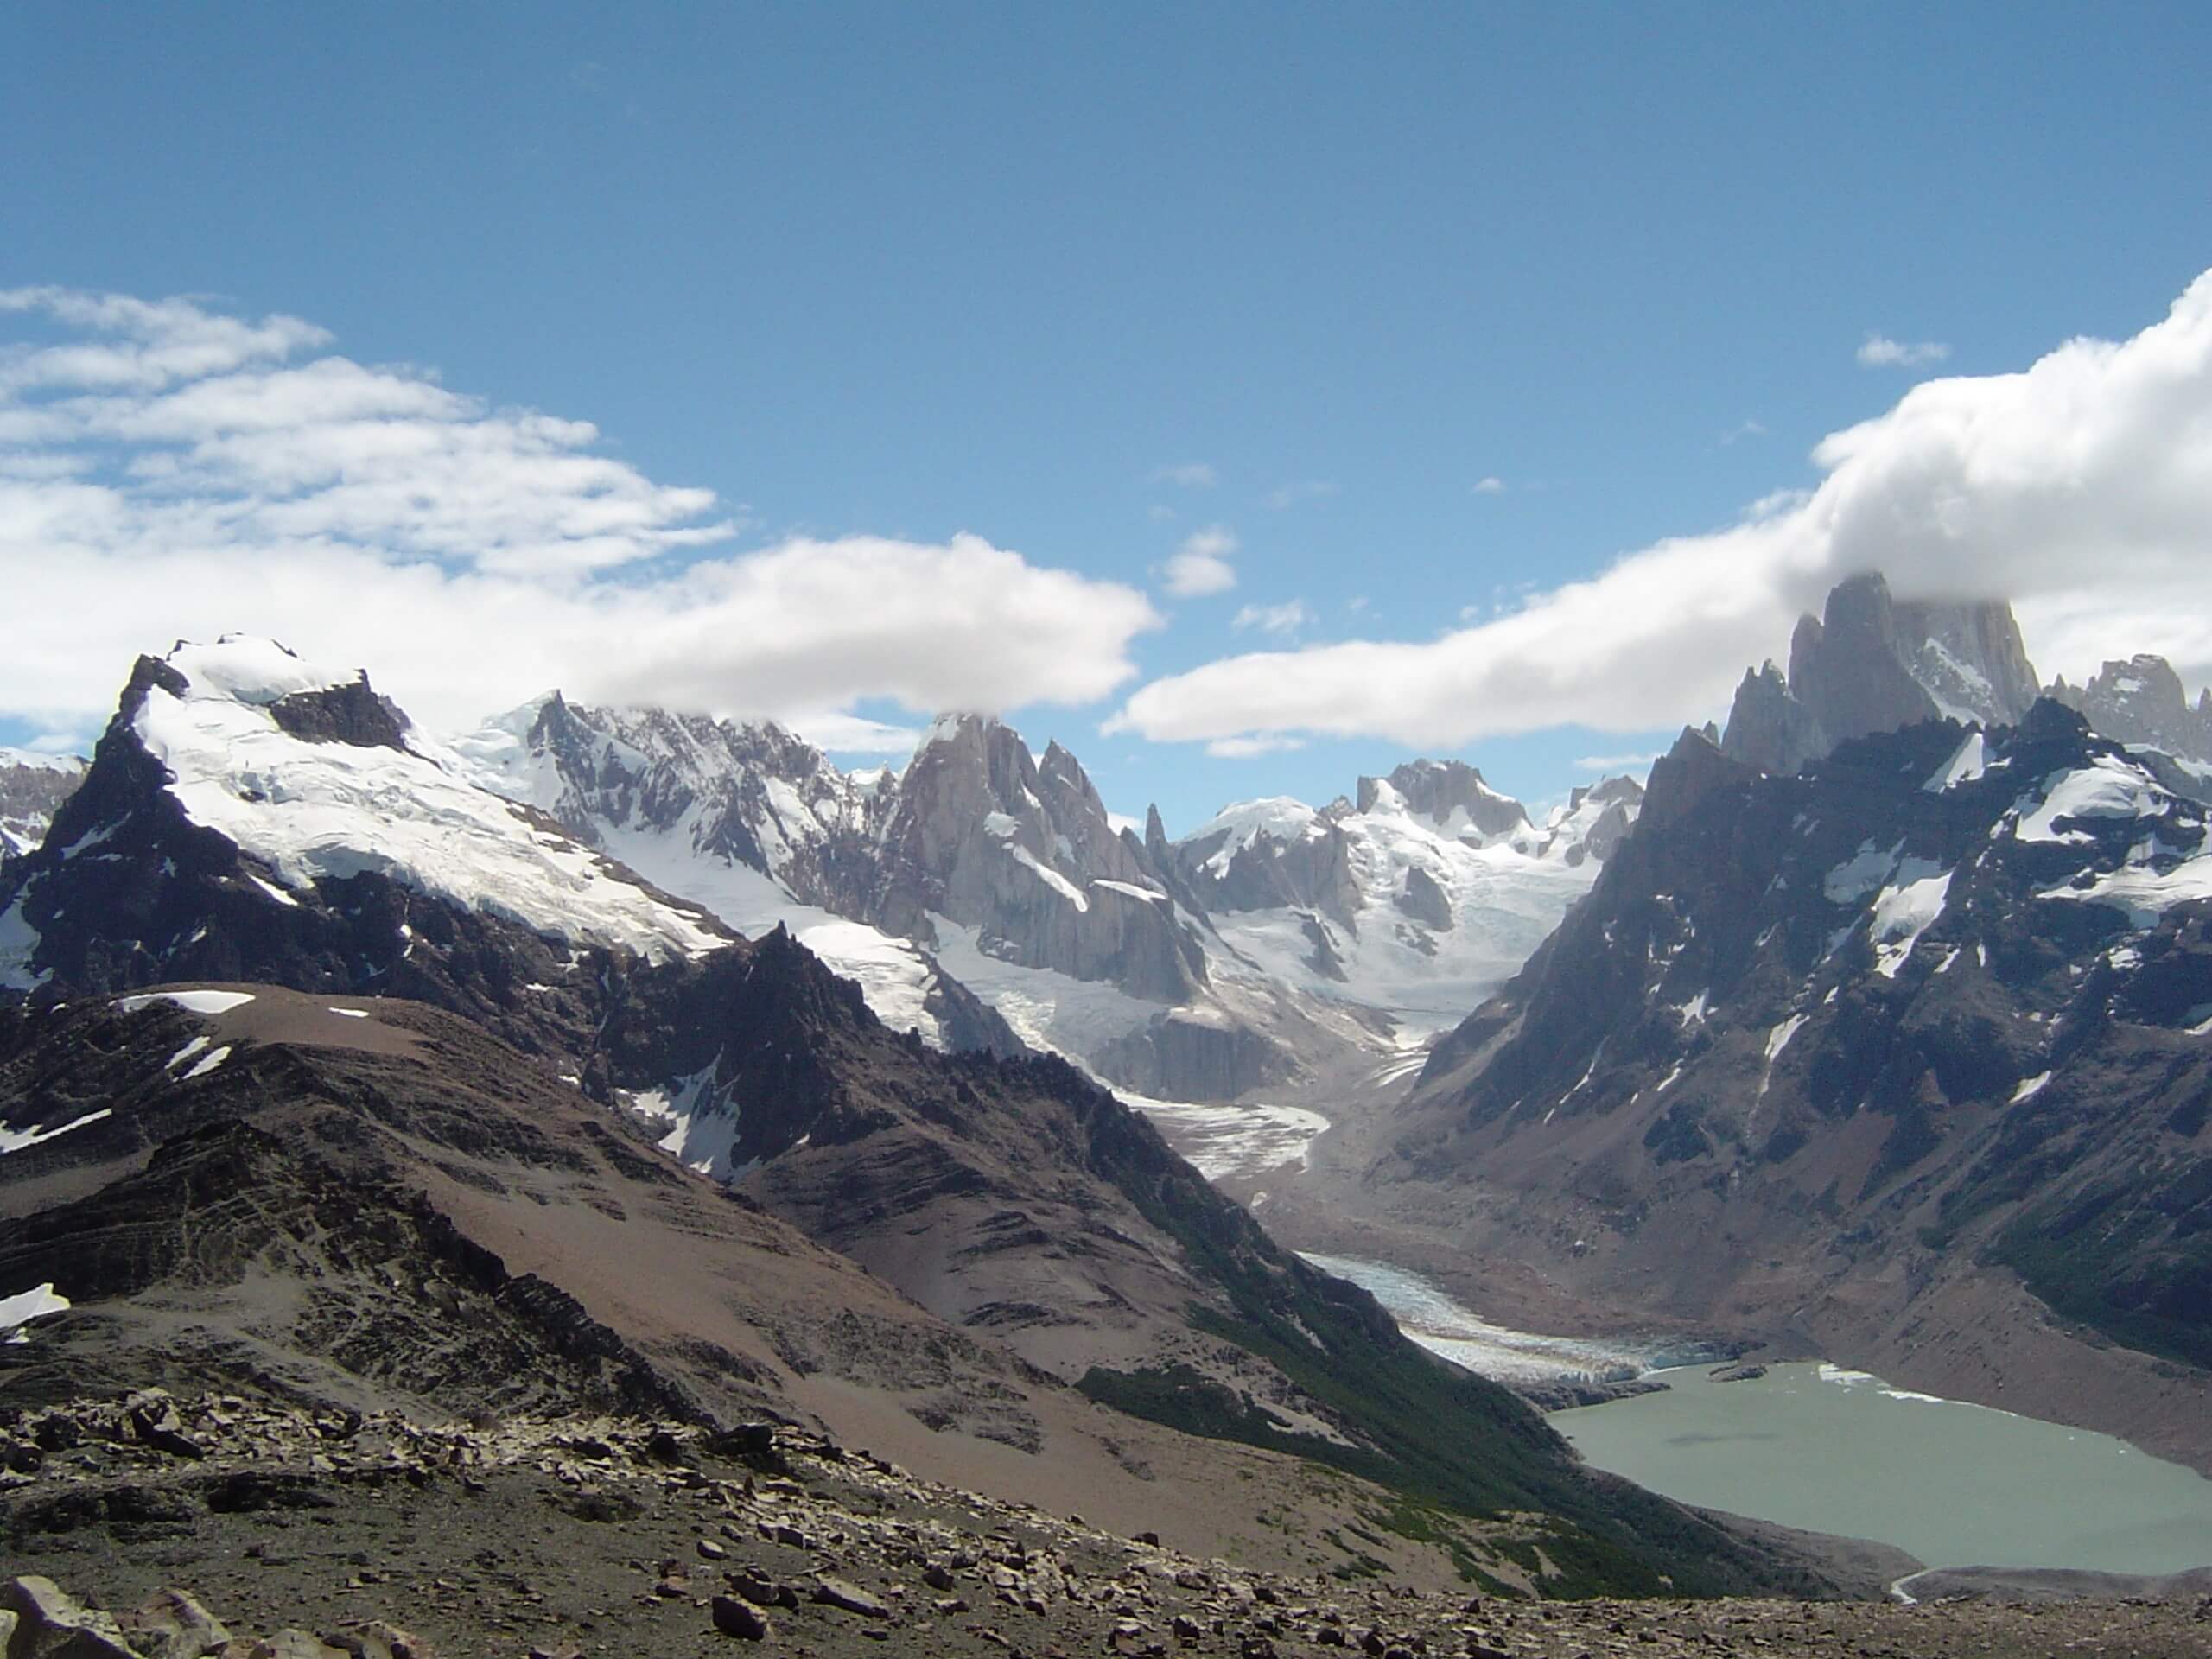 Loma-Overlook in Patagonia